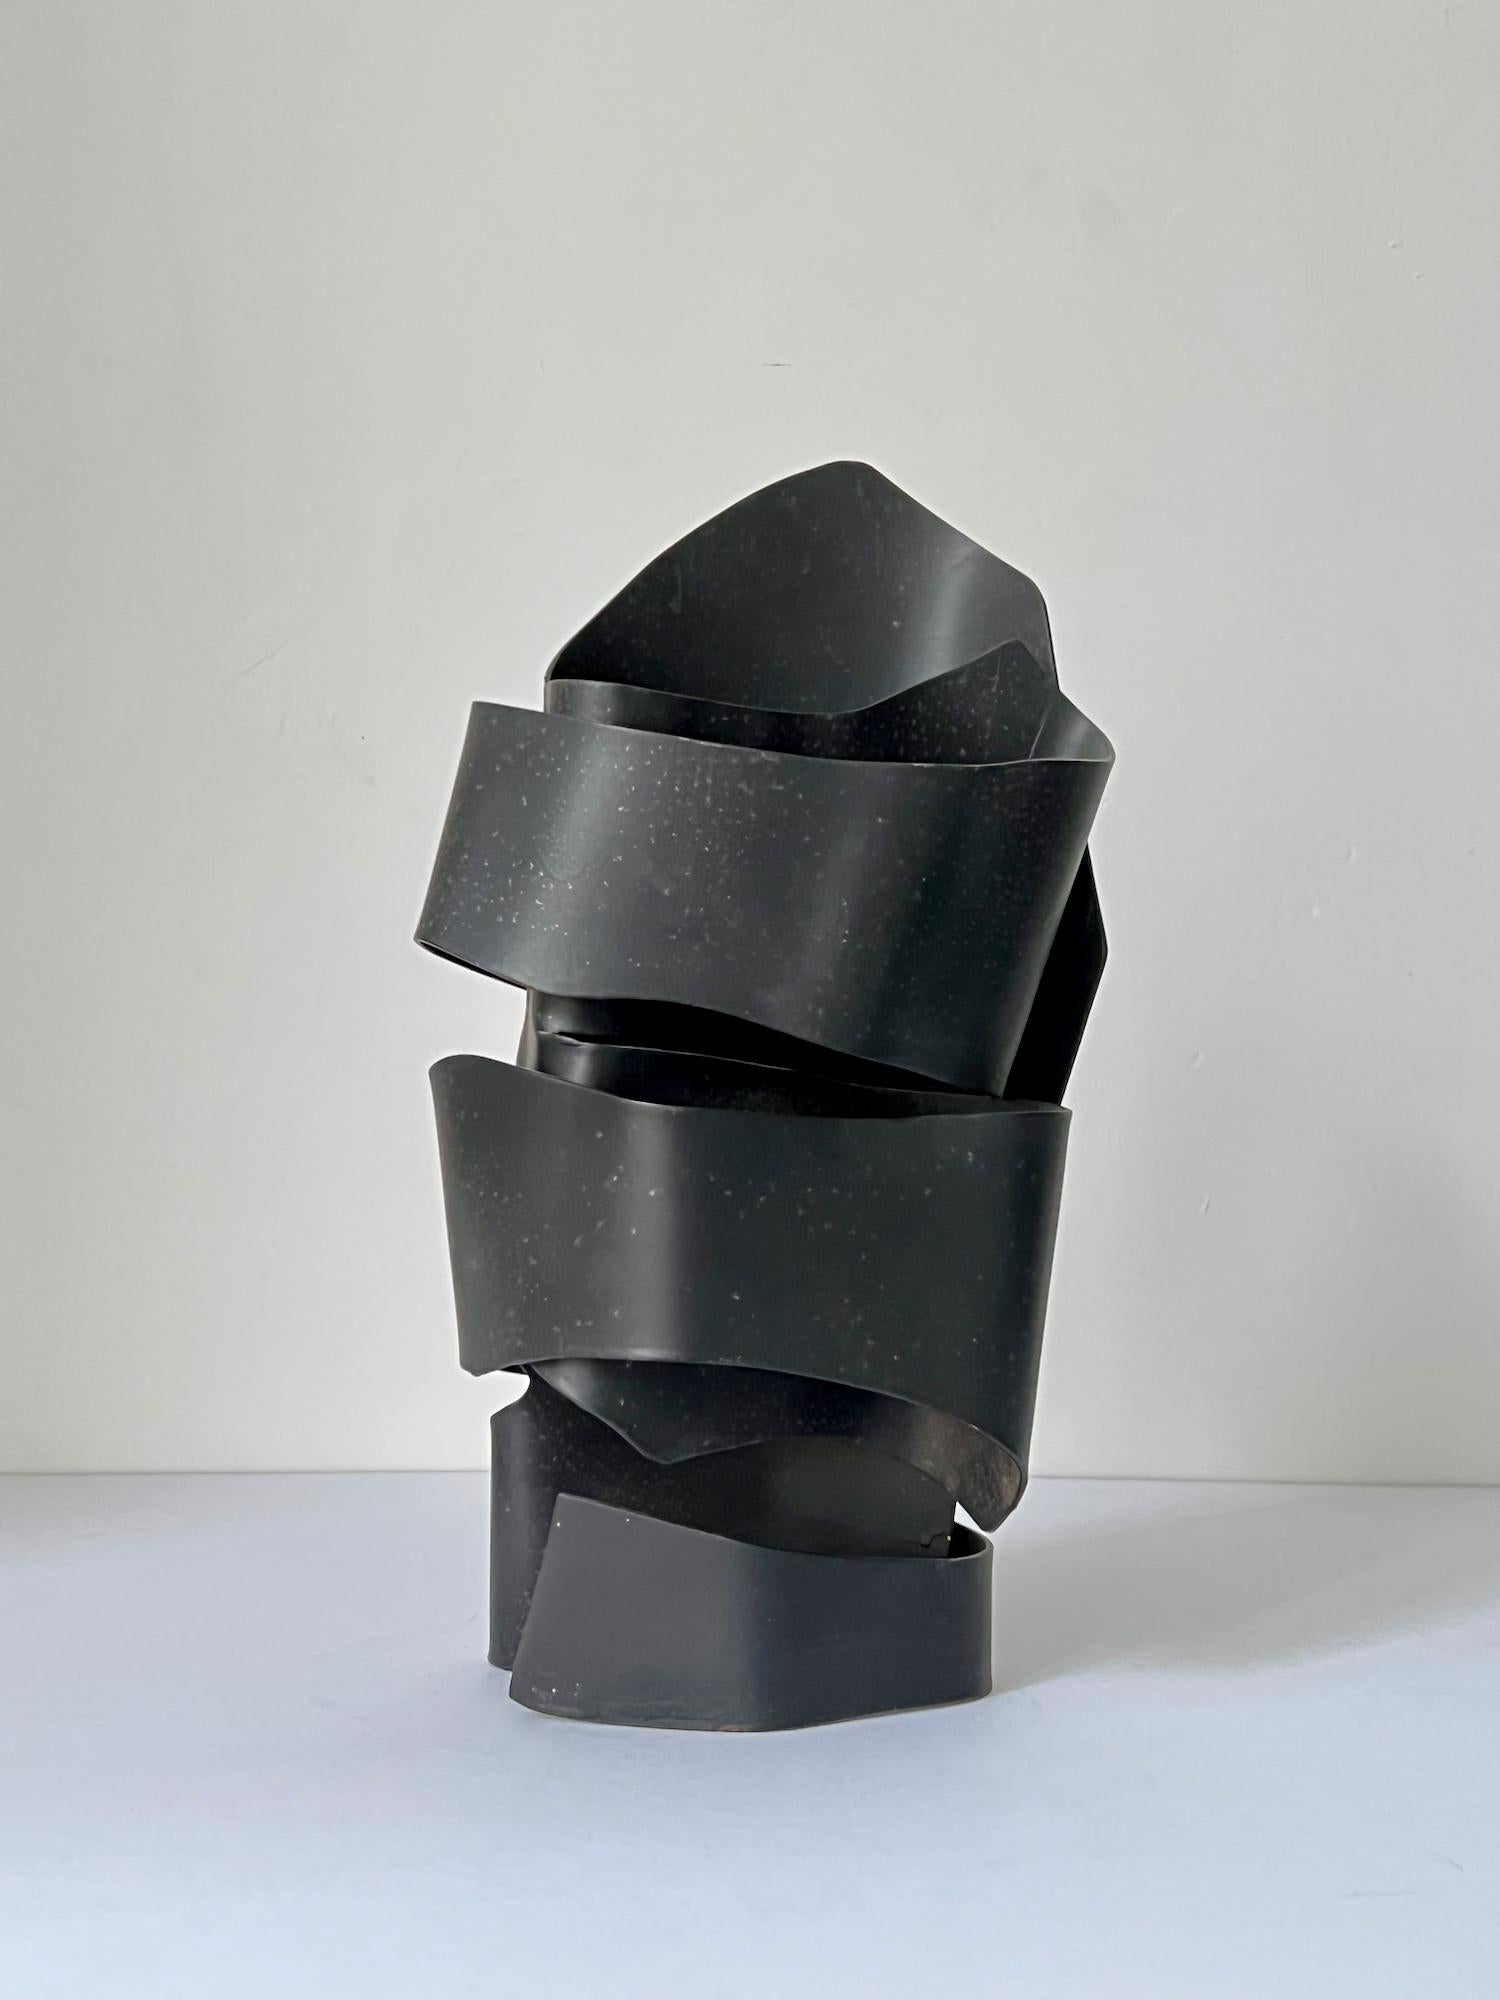 Abstract steel sculpture, in the form of a helmet; from the estate of the artist June Barrington-Ward (1922-2002) and attributed to her. England 1970s. Unsigned.

Good original condition with some signs of age-appropriate wear including small rust